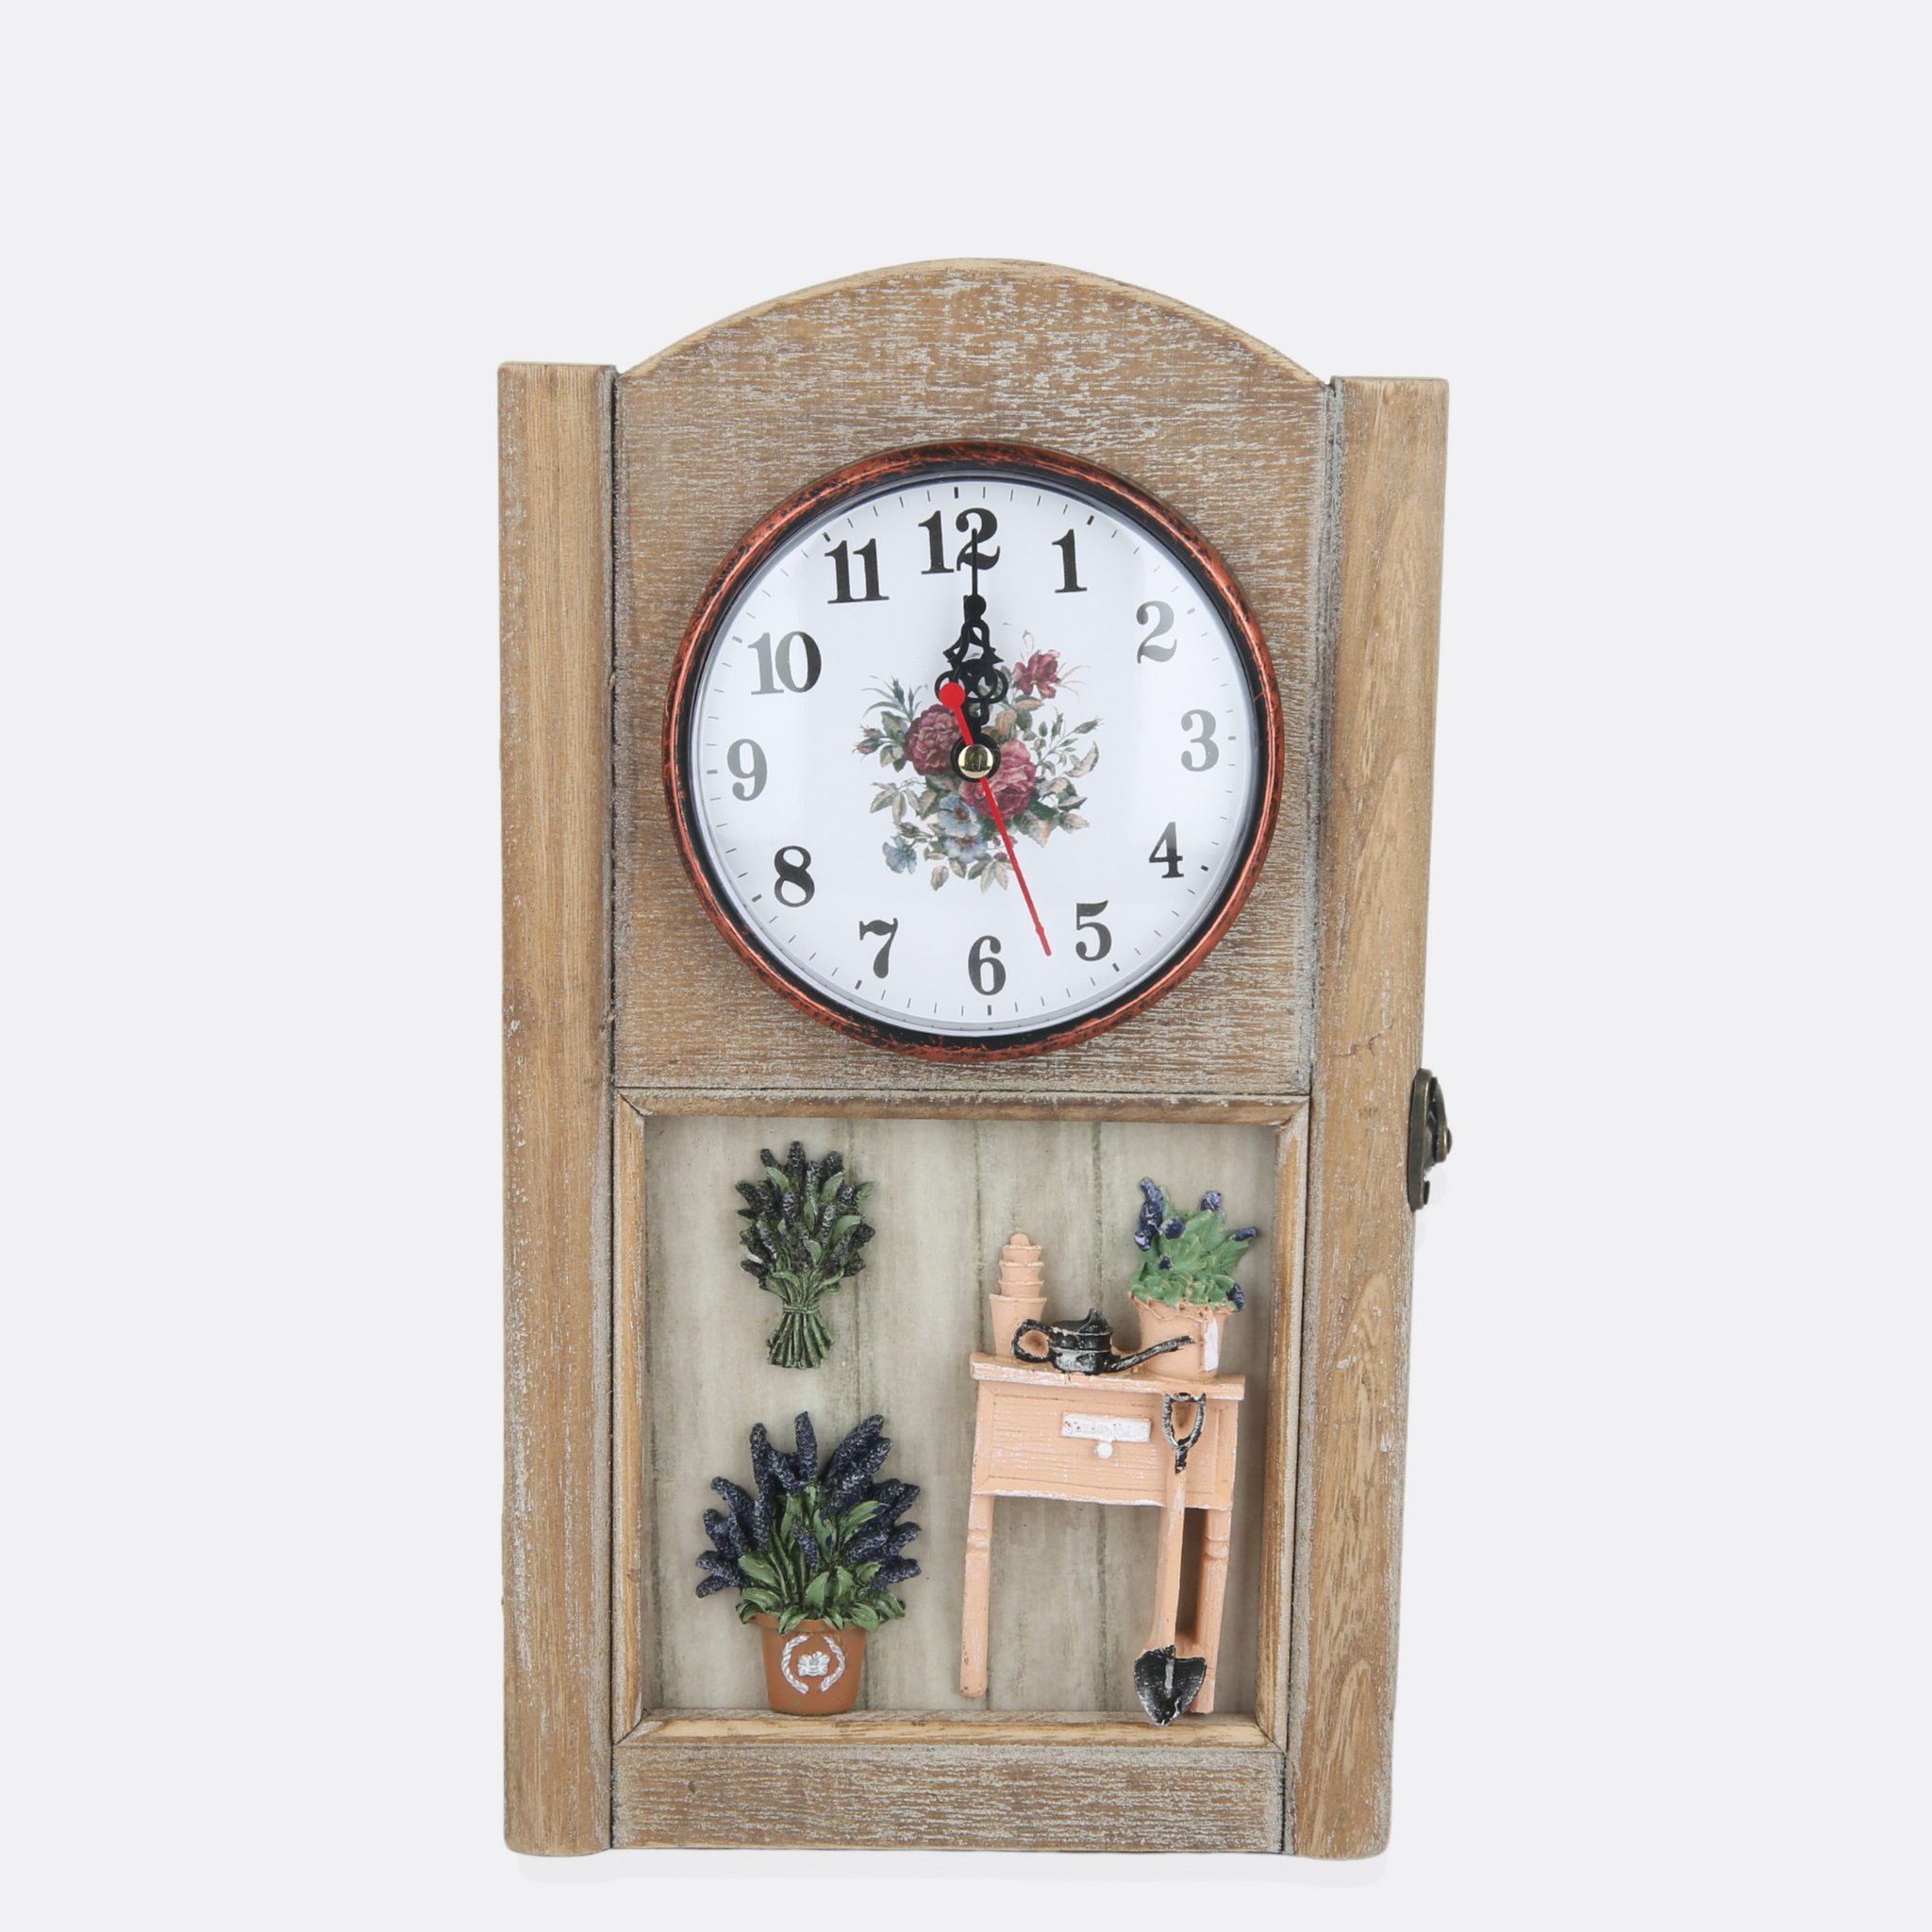 Wooden Key Holder With Clock And Openable Door